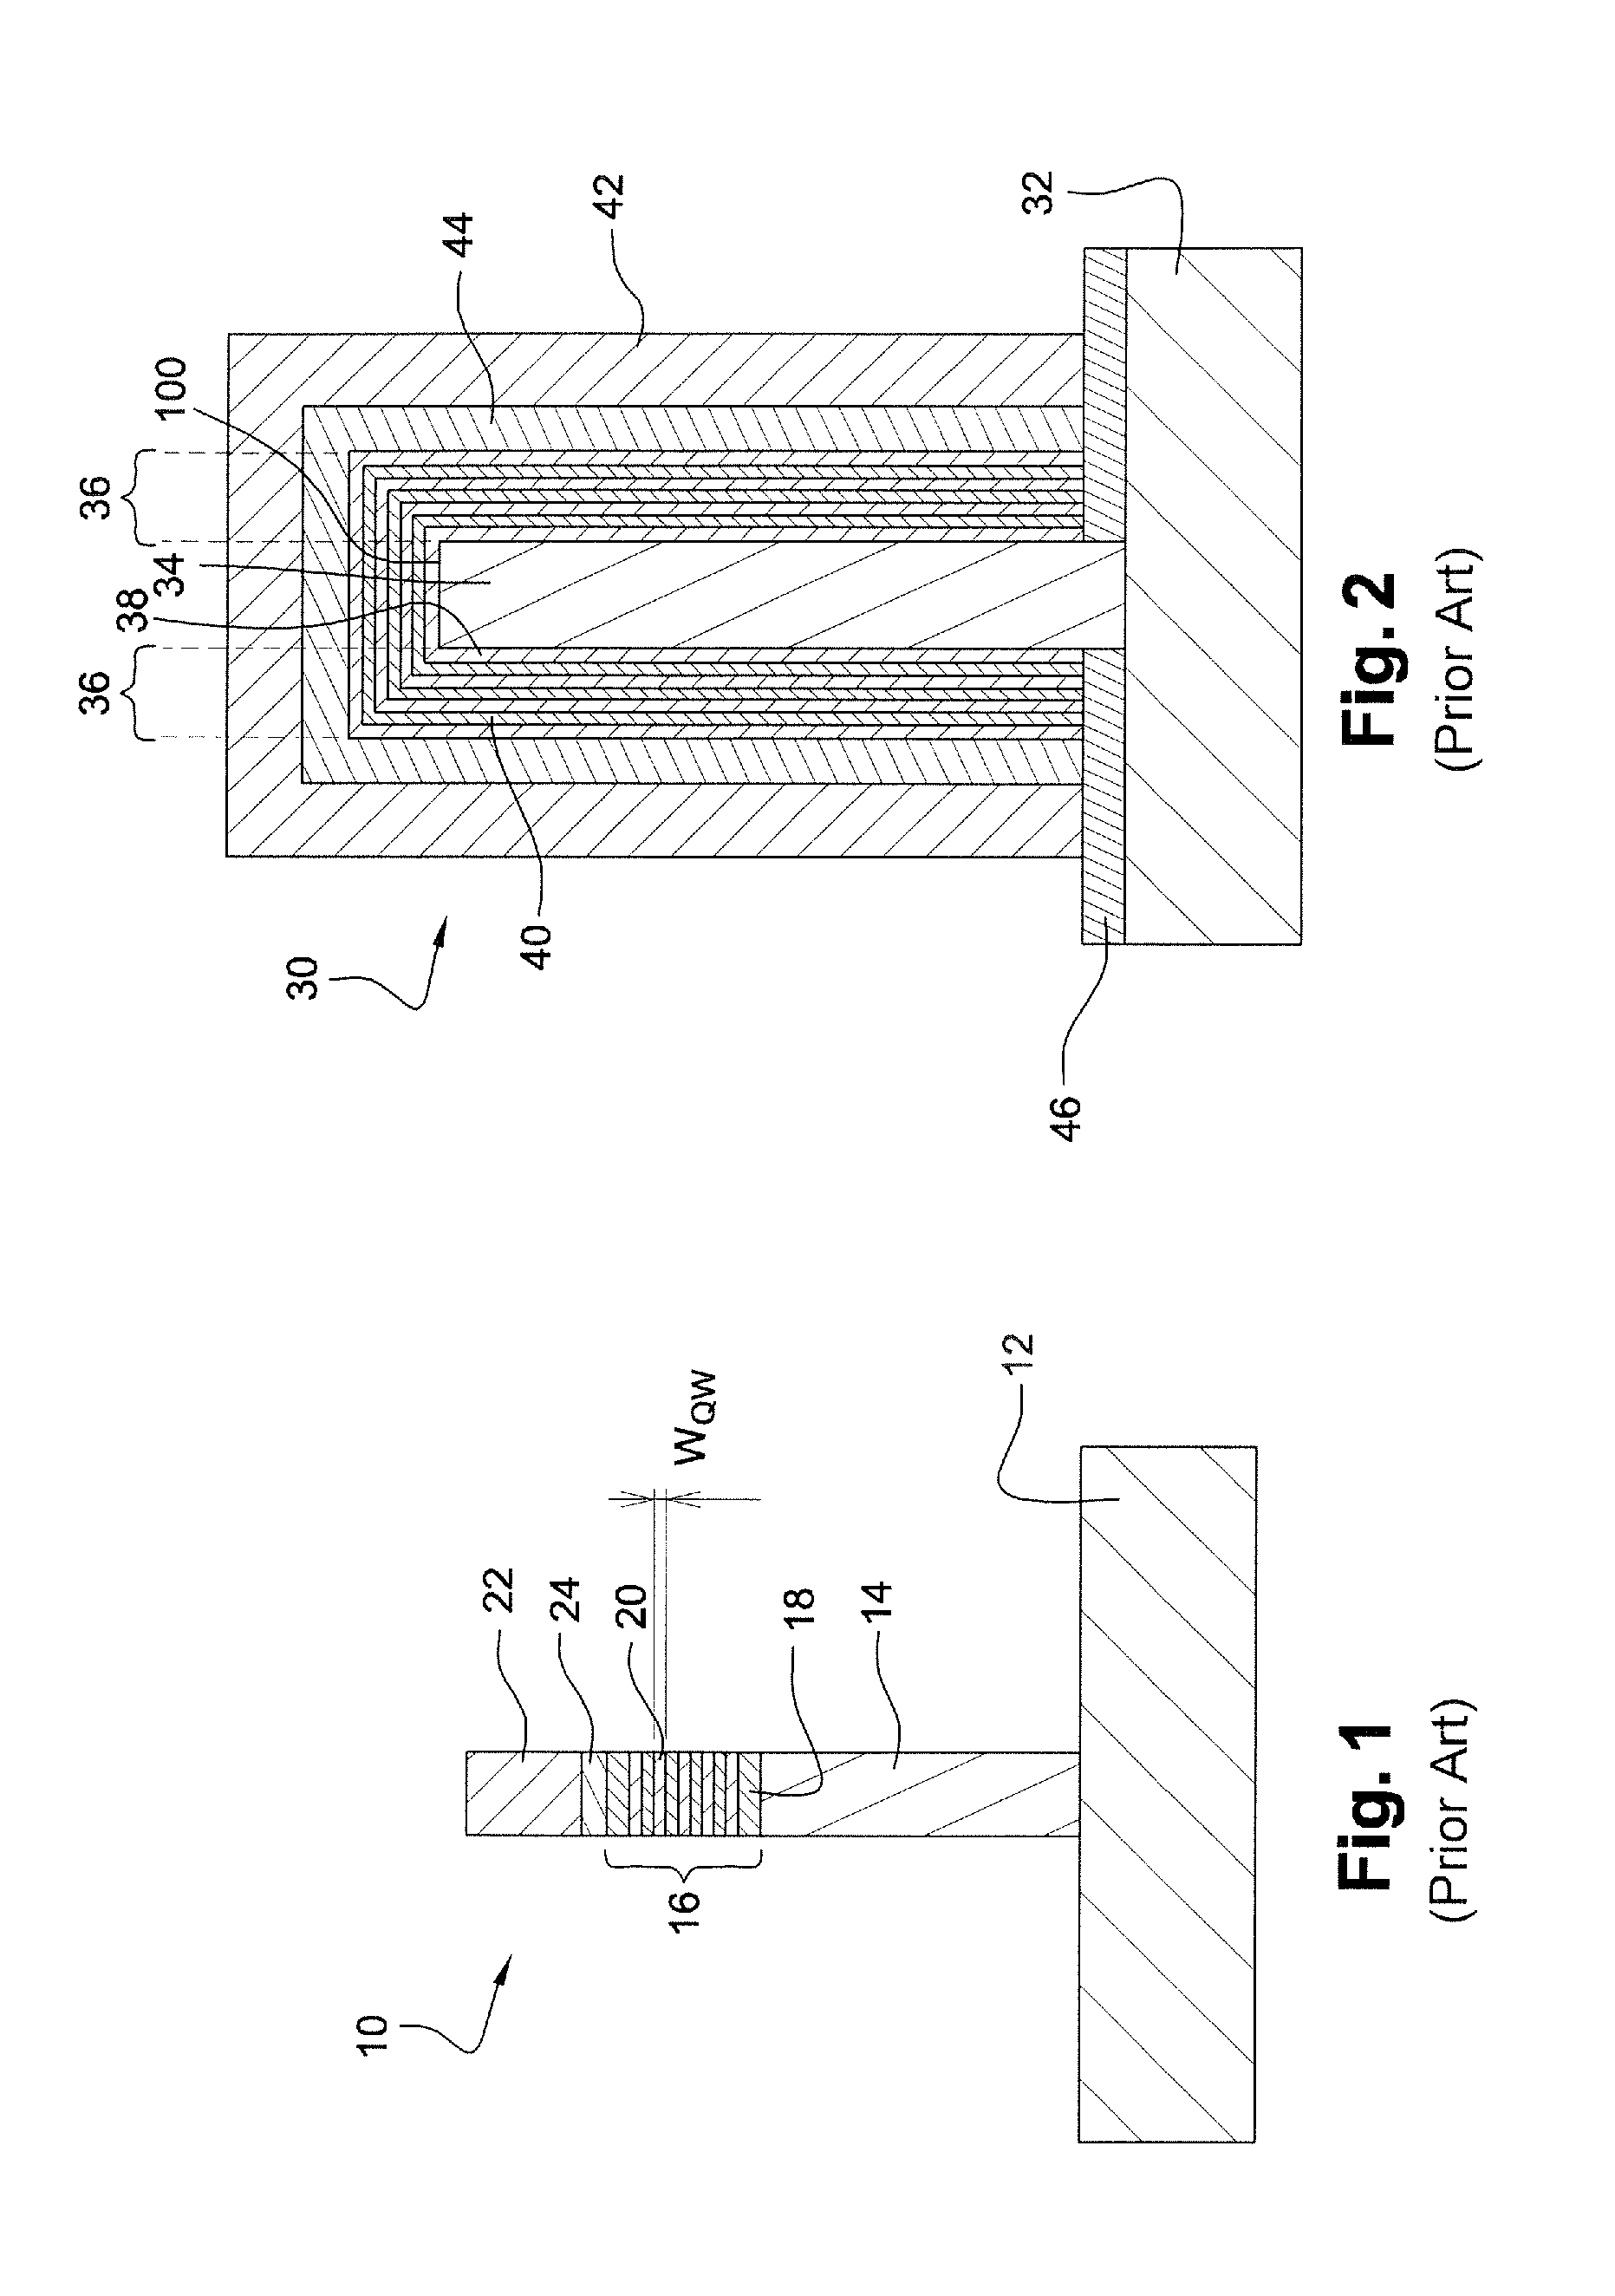 In-series electrical connection of light-emitting nanowires